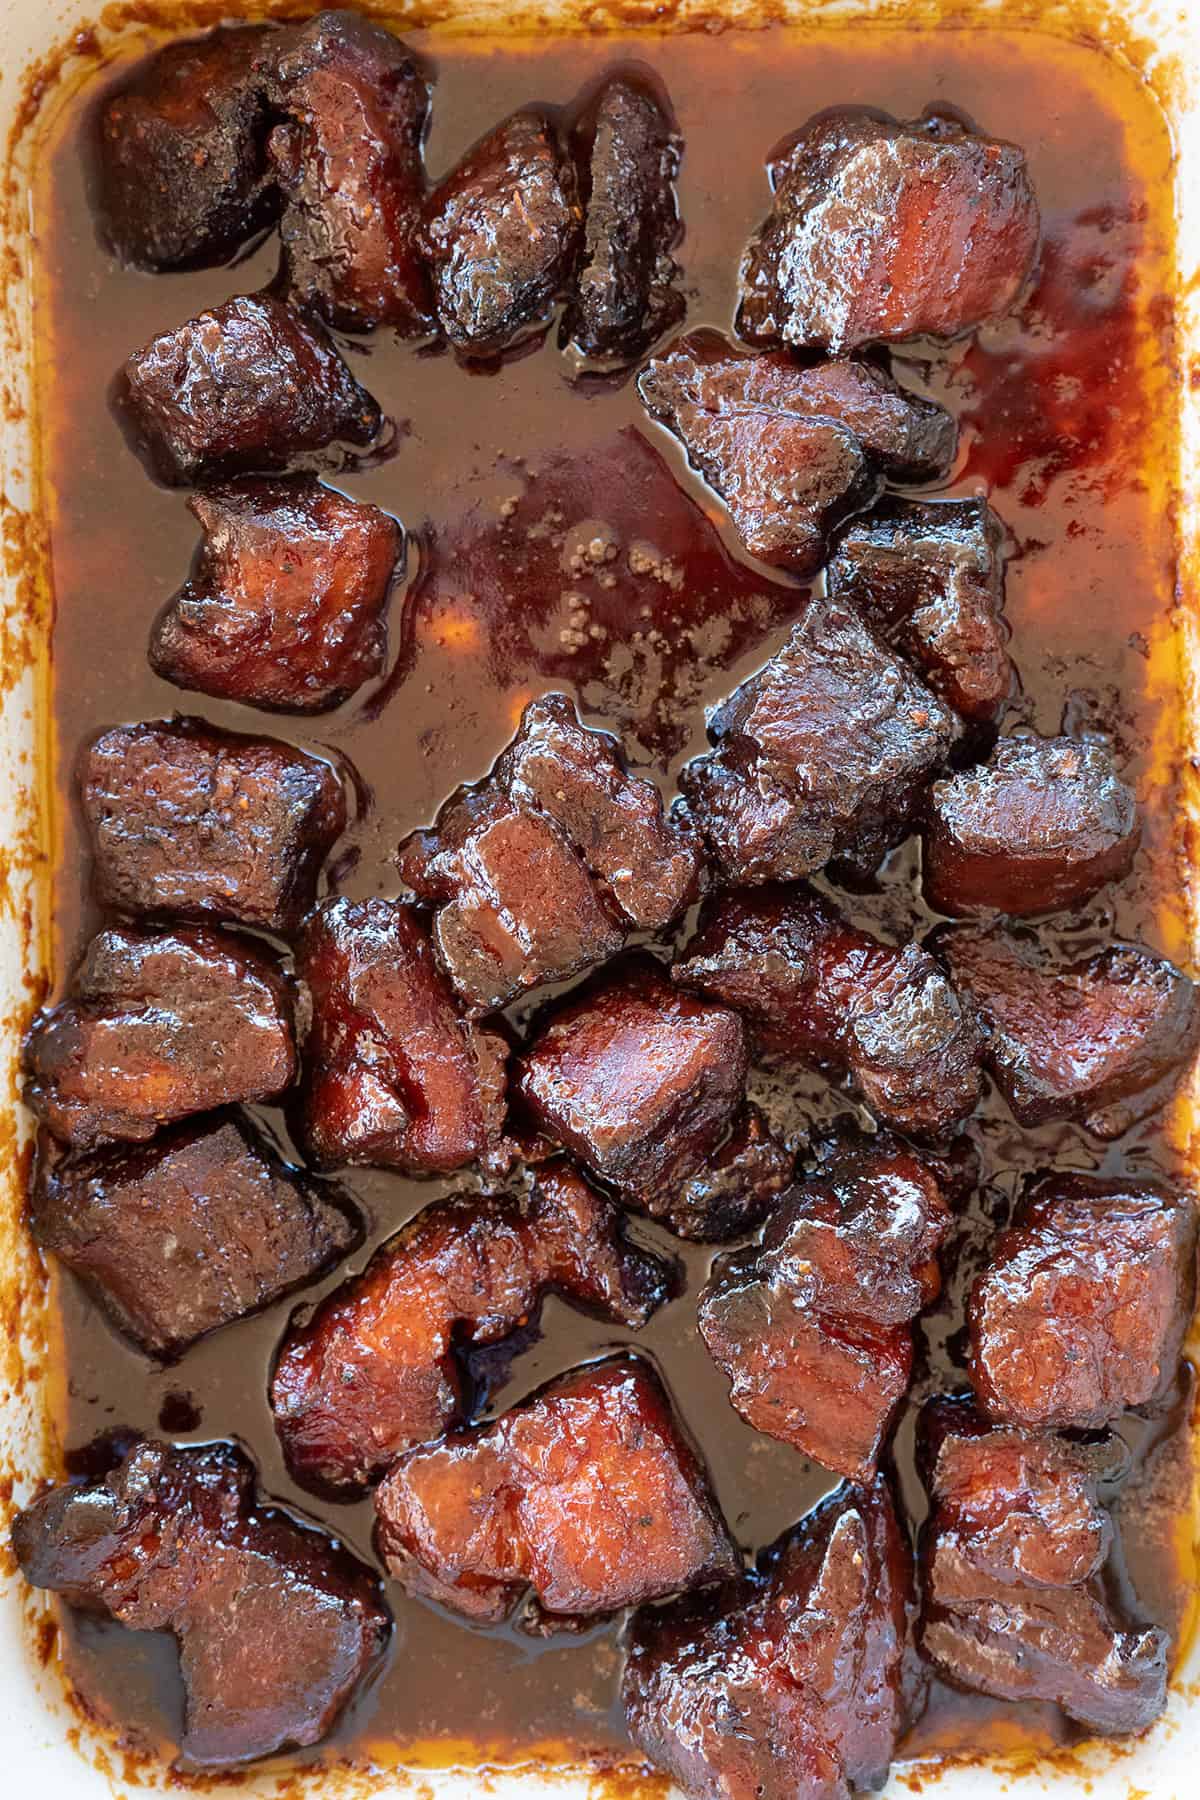 smoked pork belly burnt ends in sauce.